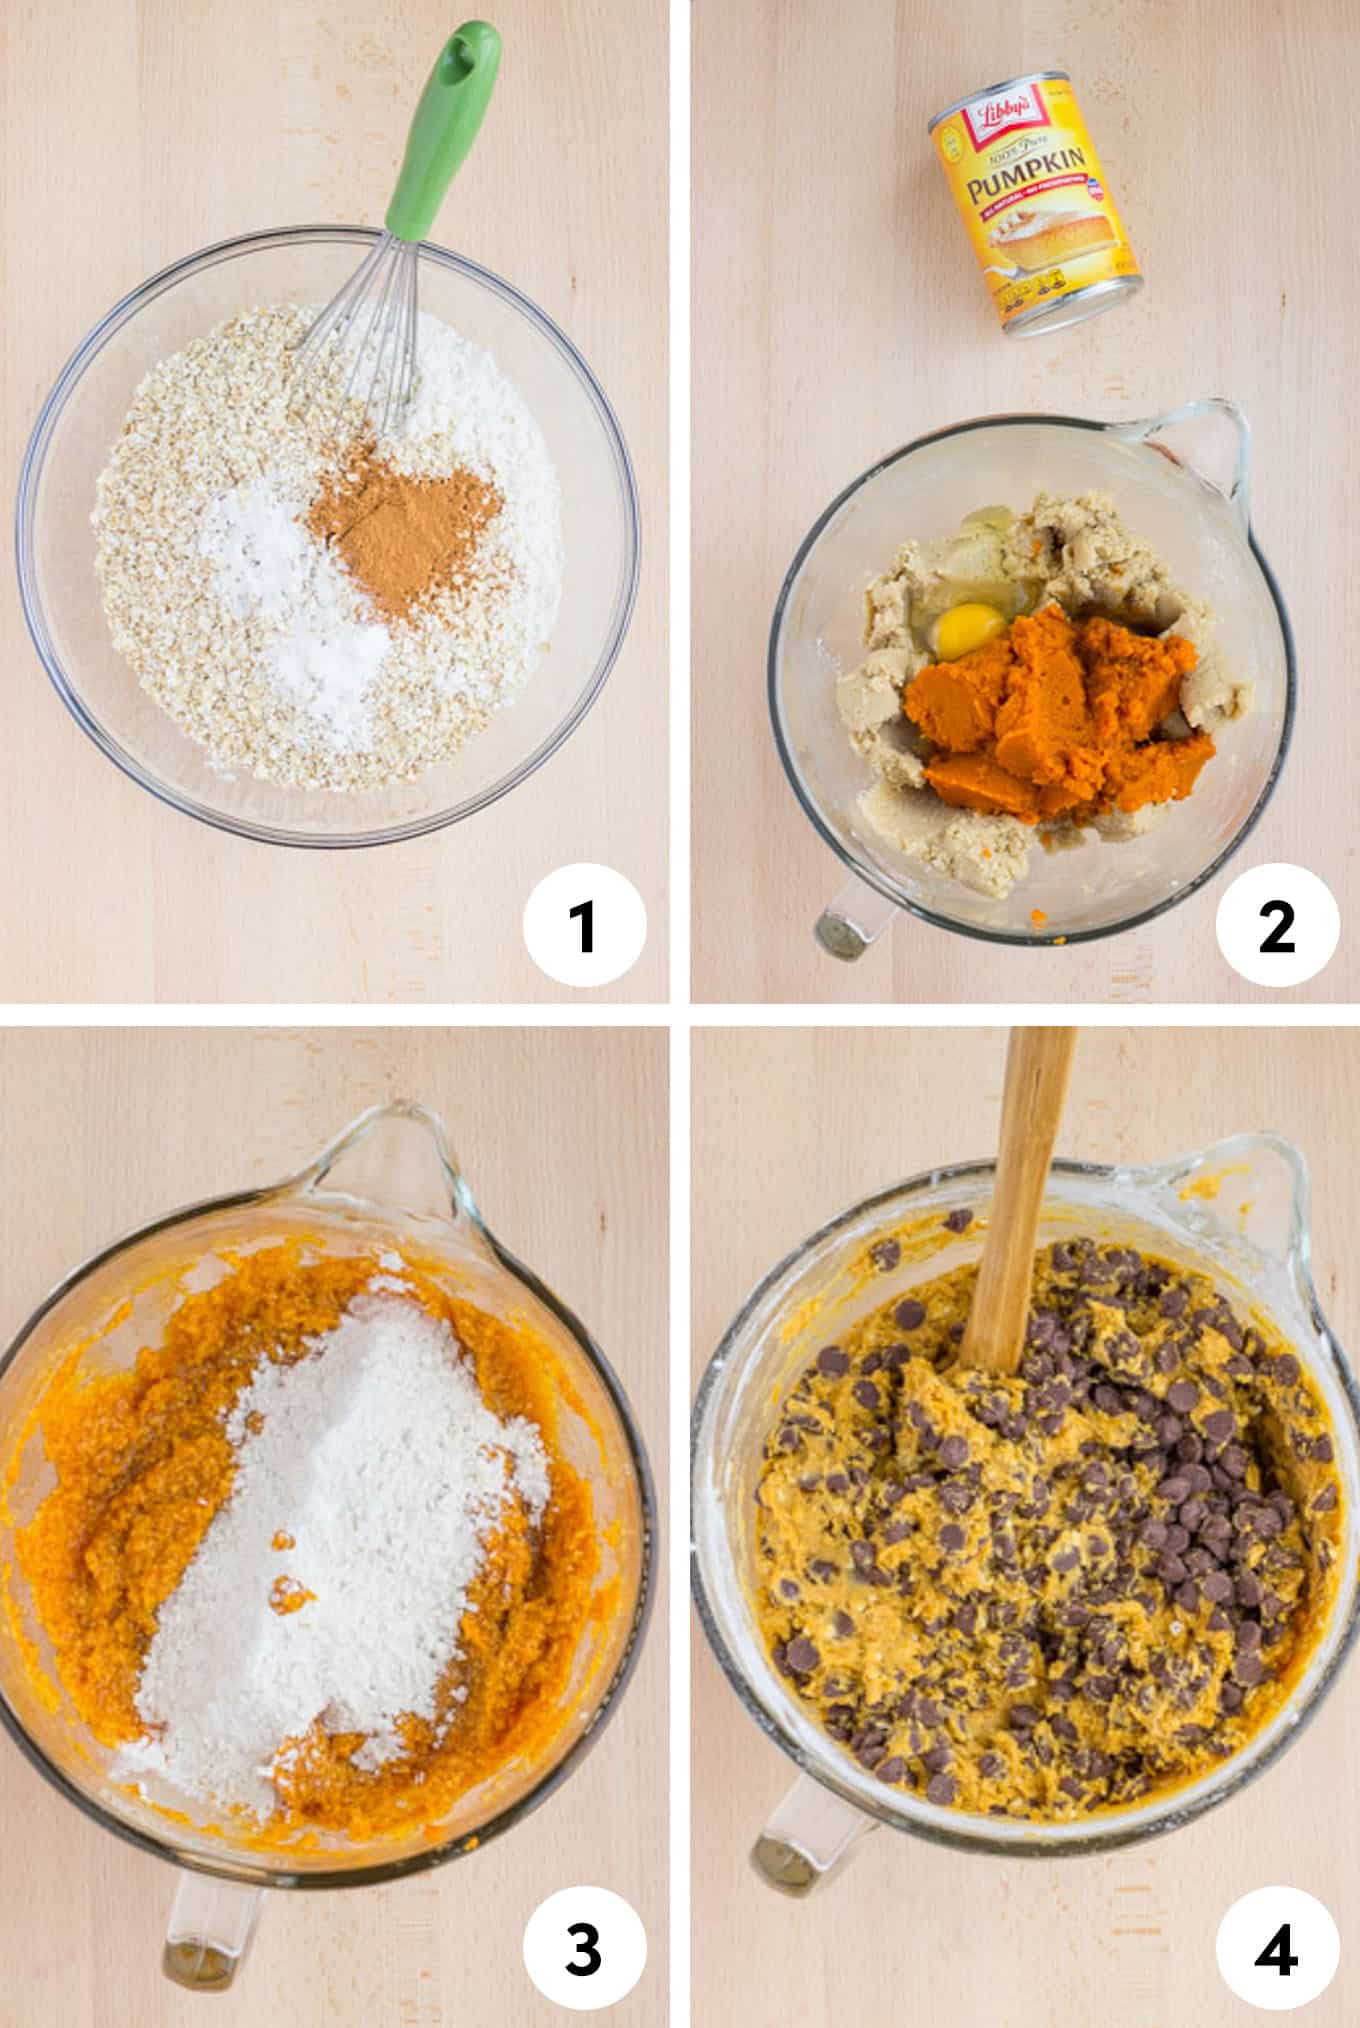 A collage of images showing the main steps in making pumpkin oatmeal cookies.